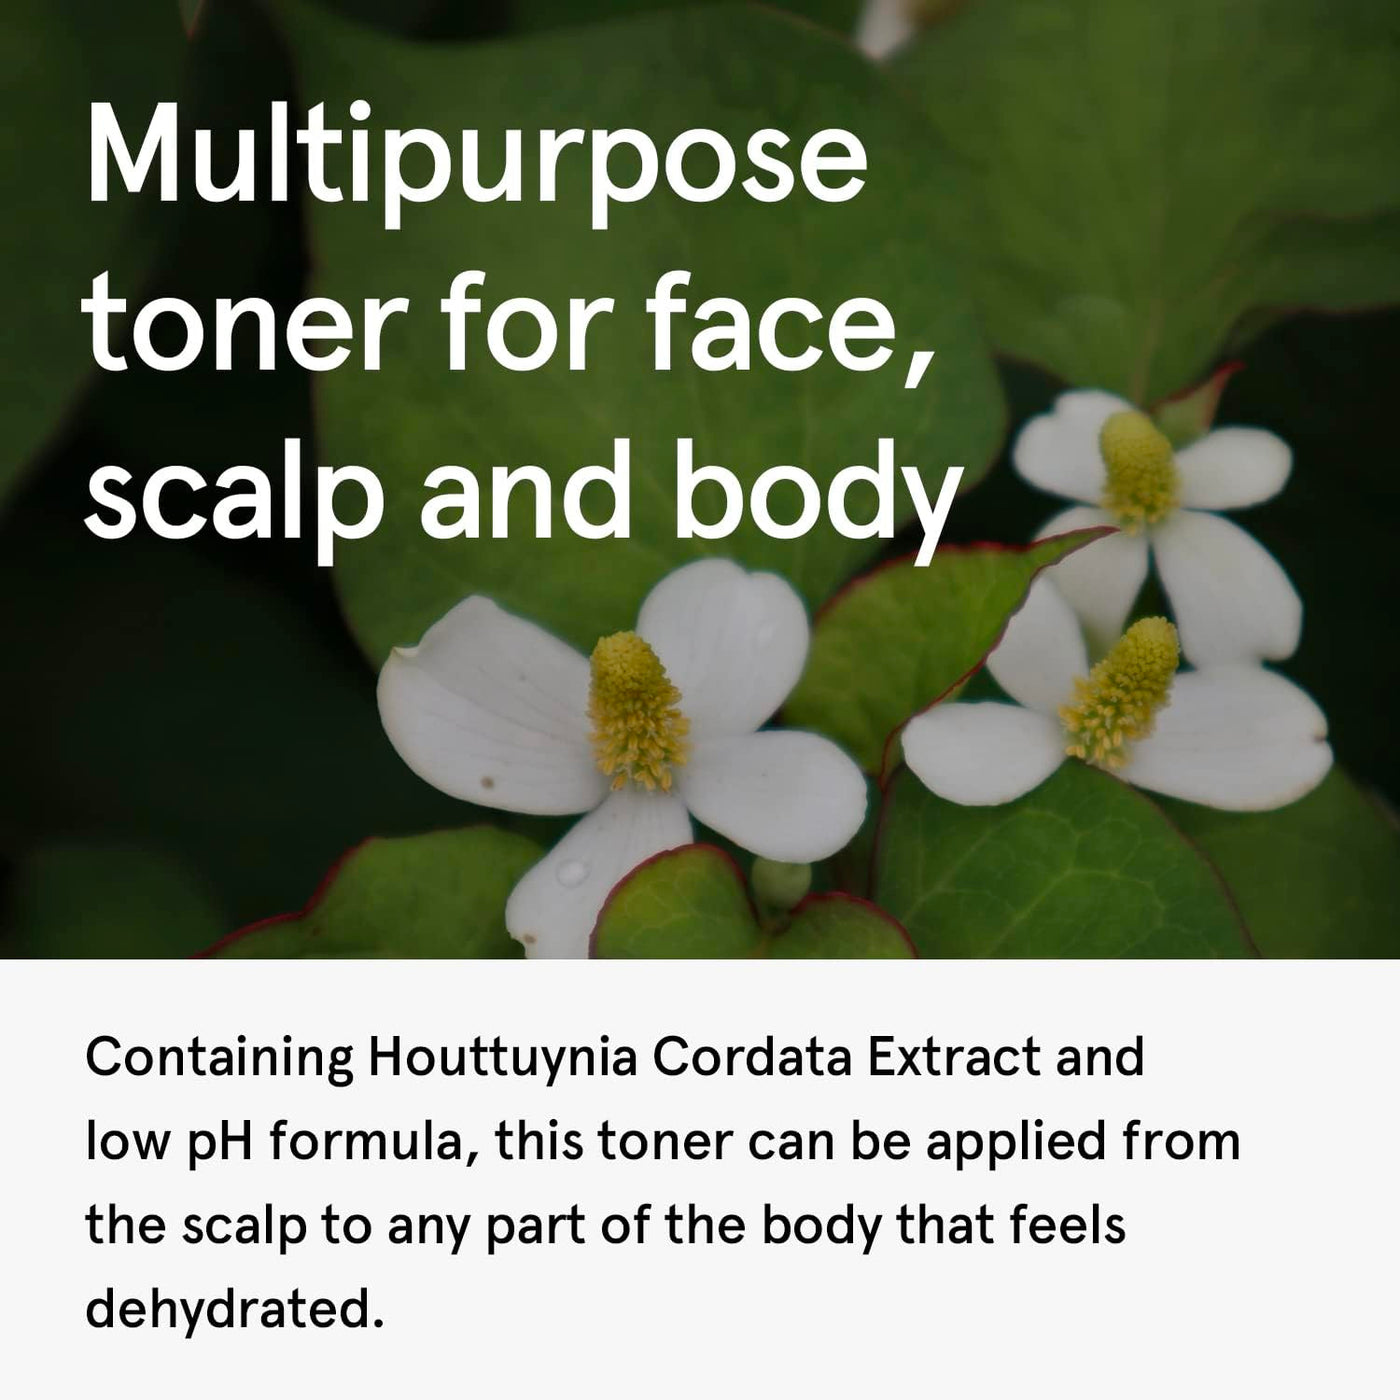 One Thing Houttuynia Cordata Extract